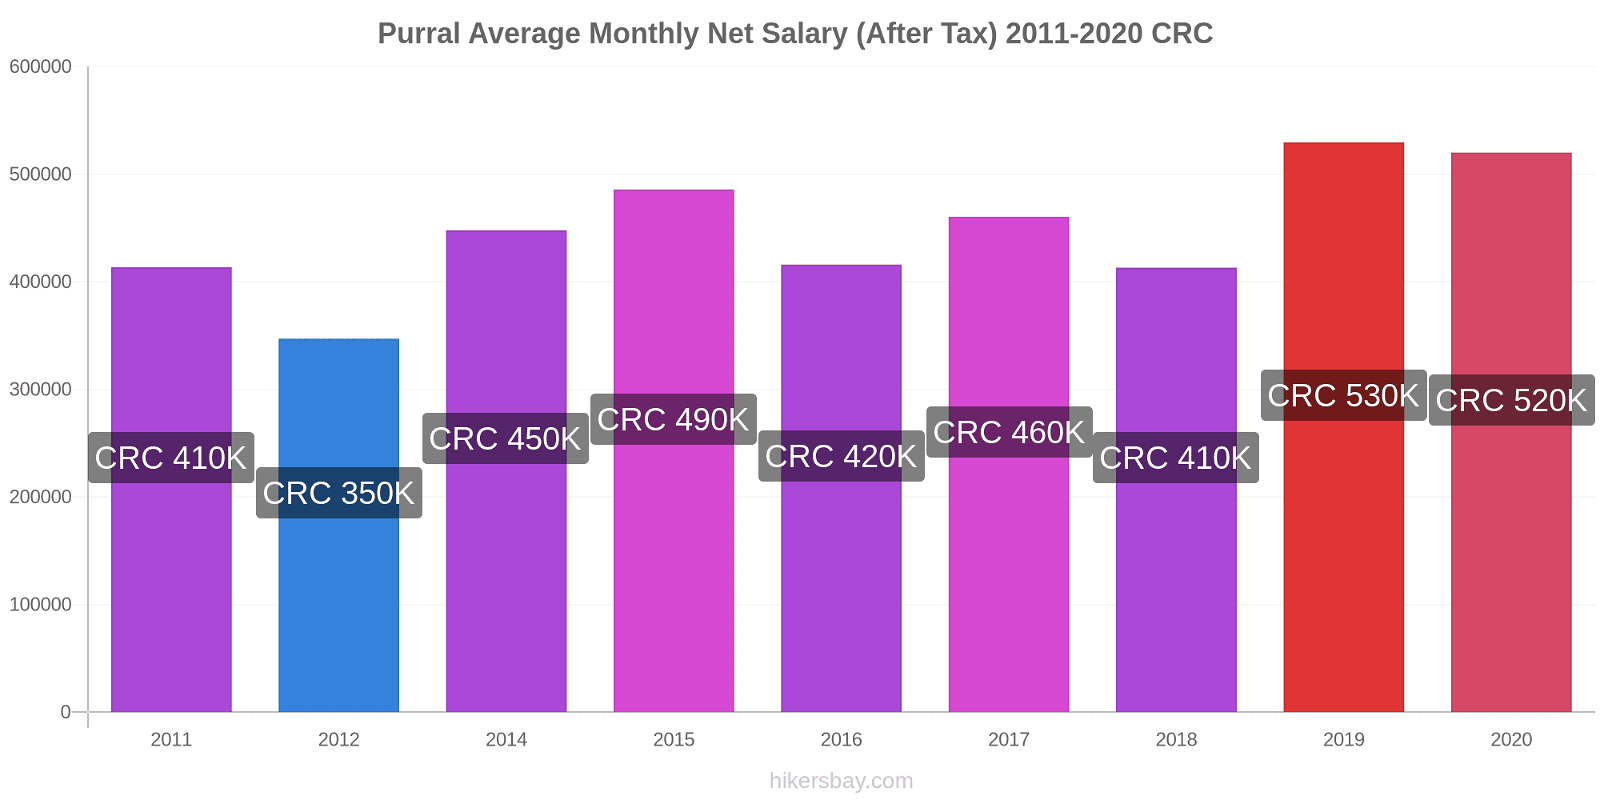 Purral price changes Average Monthly Net Salary (After Tax) hikersbay.com